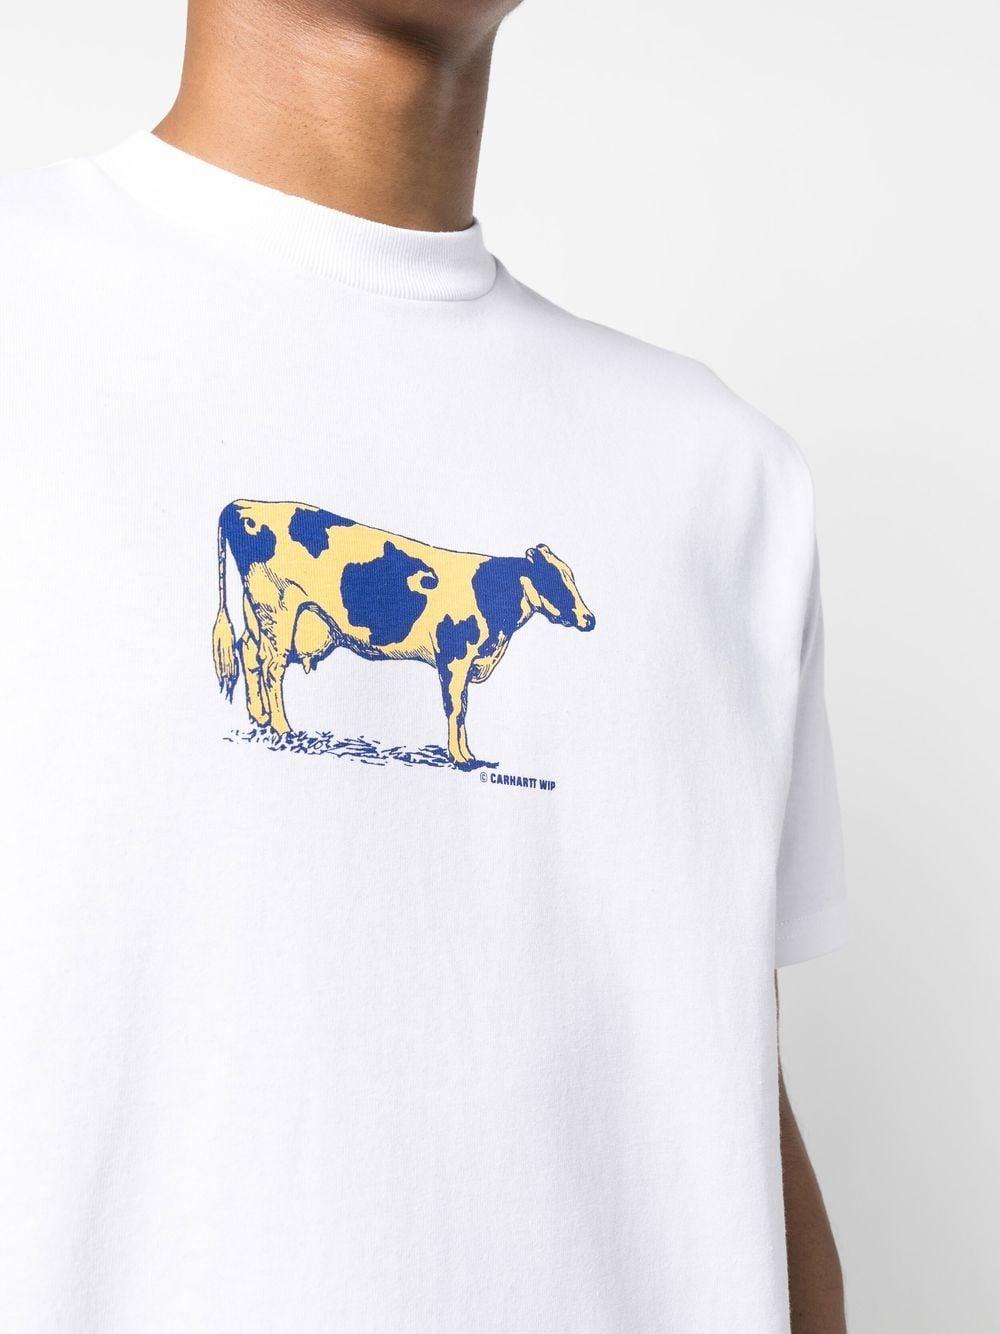 Carhartt WIP Cow-print Cotton T-shirt in White for Men Lyst